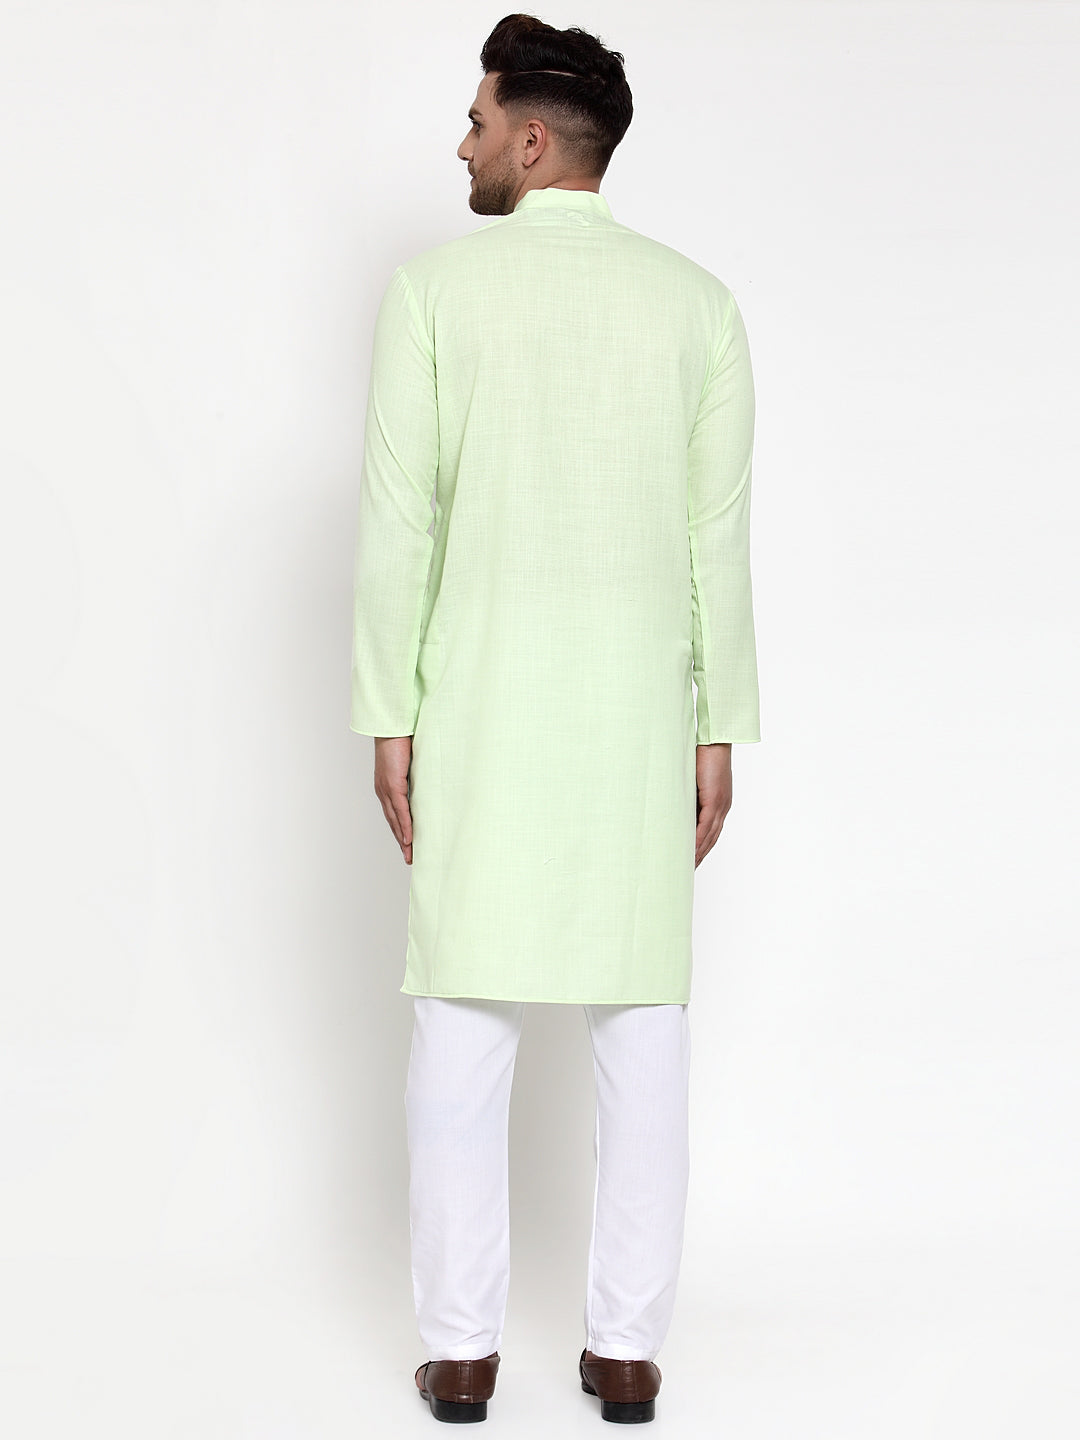 Jompers Men Lime Green & White Solid Kurta with Churidar